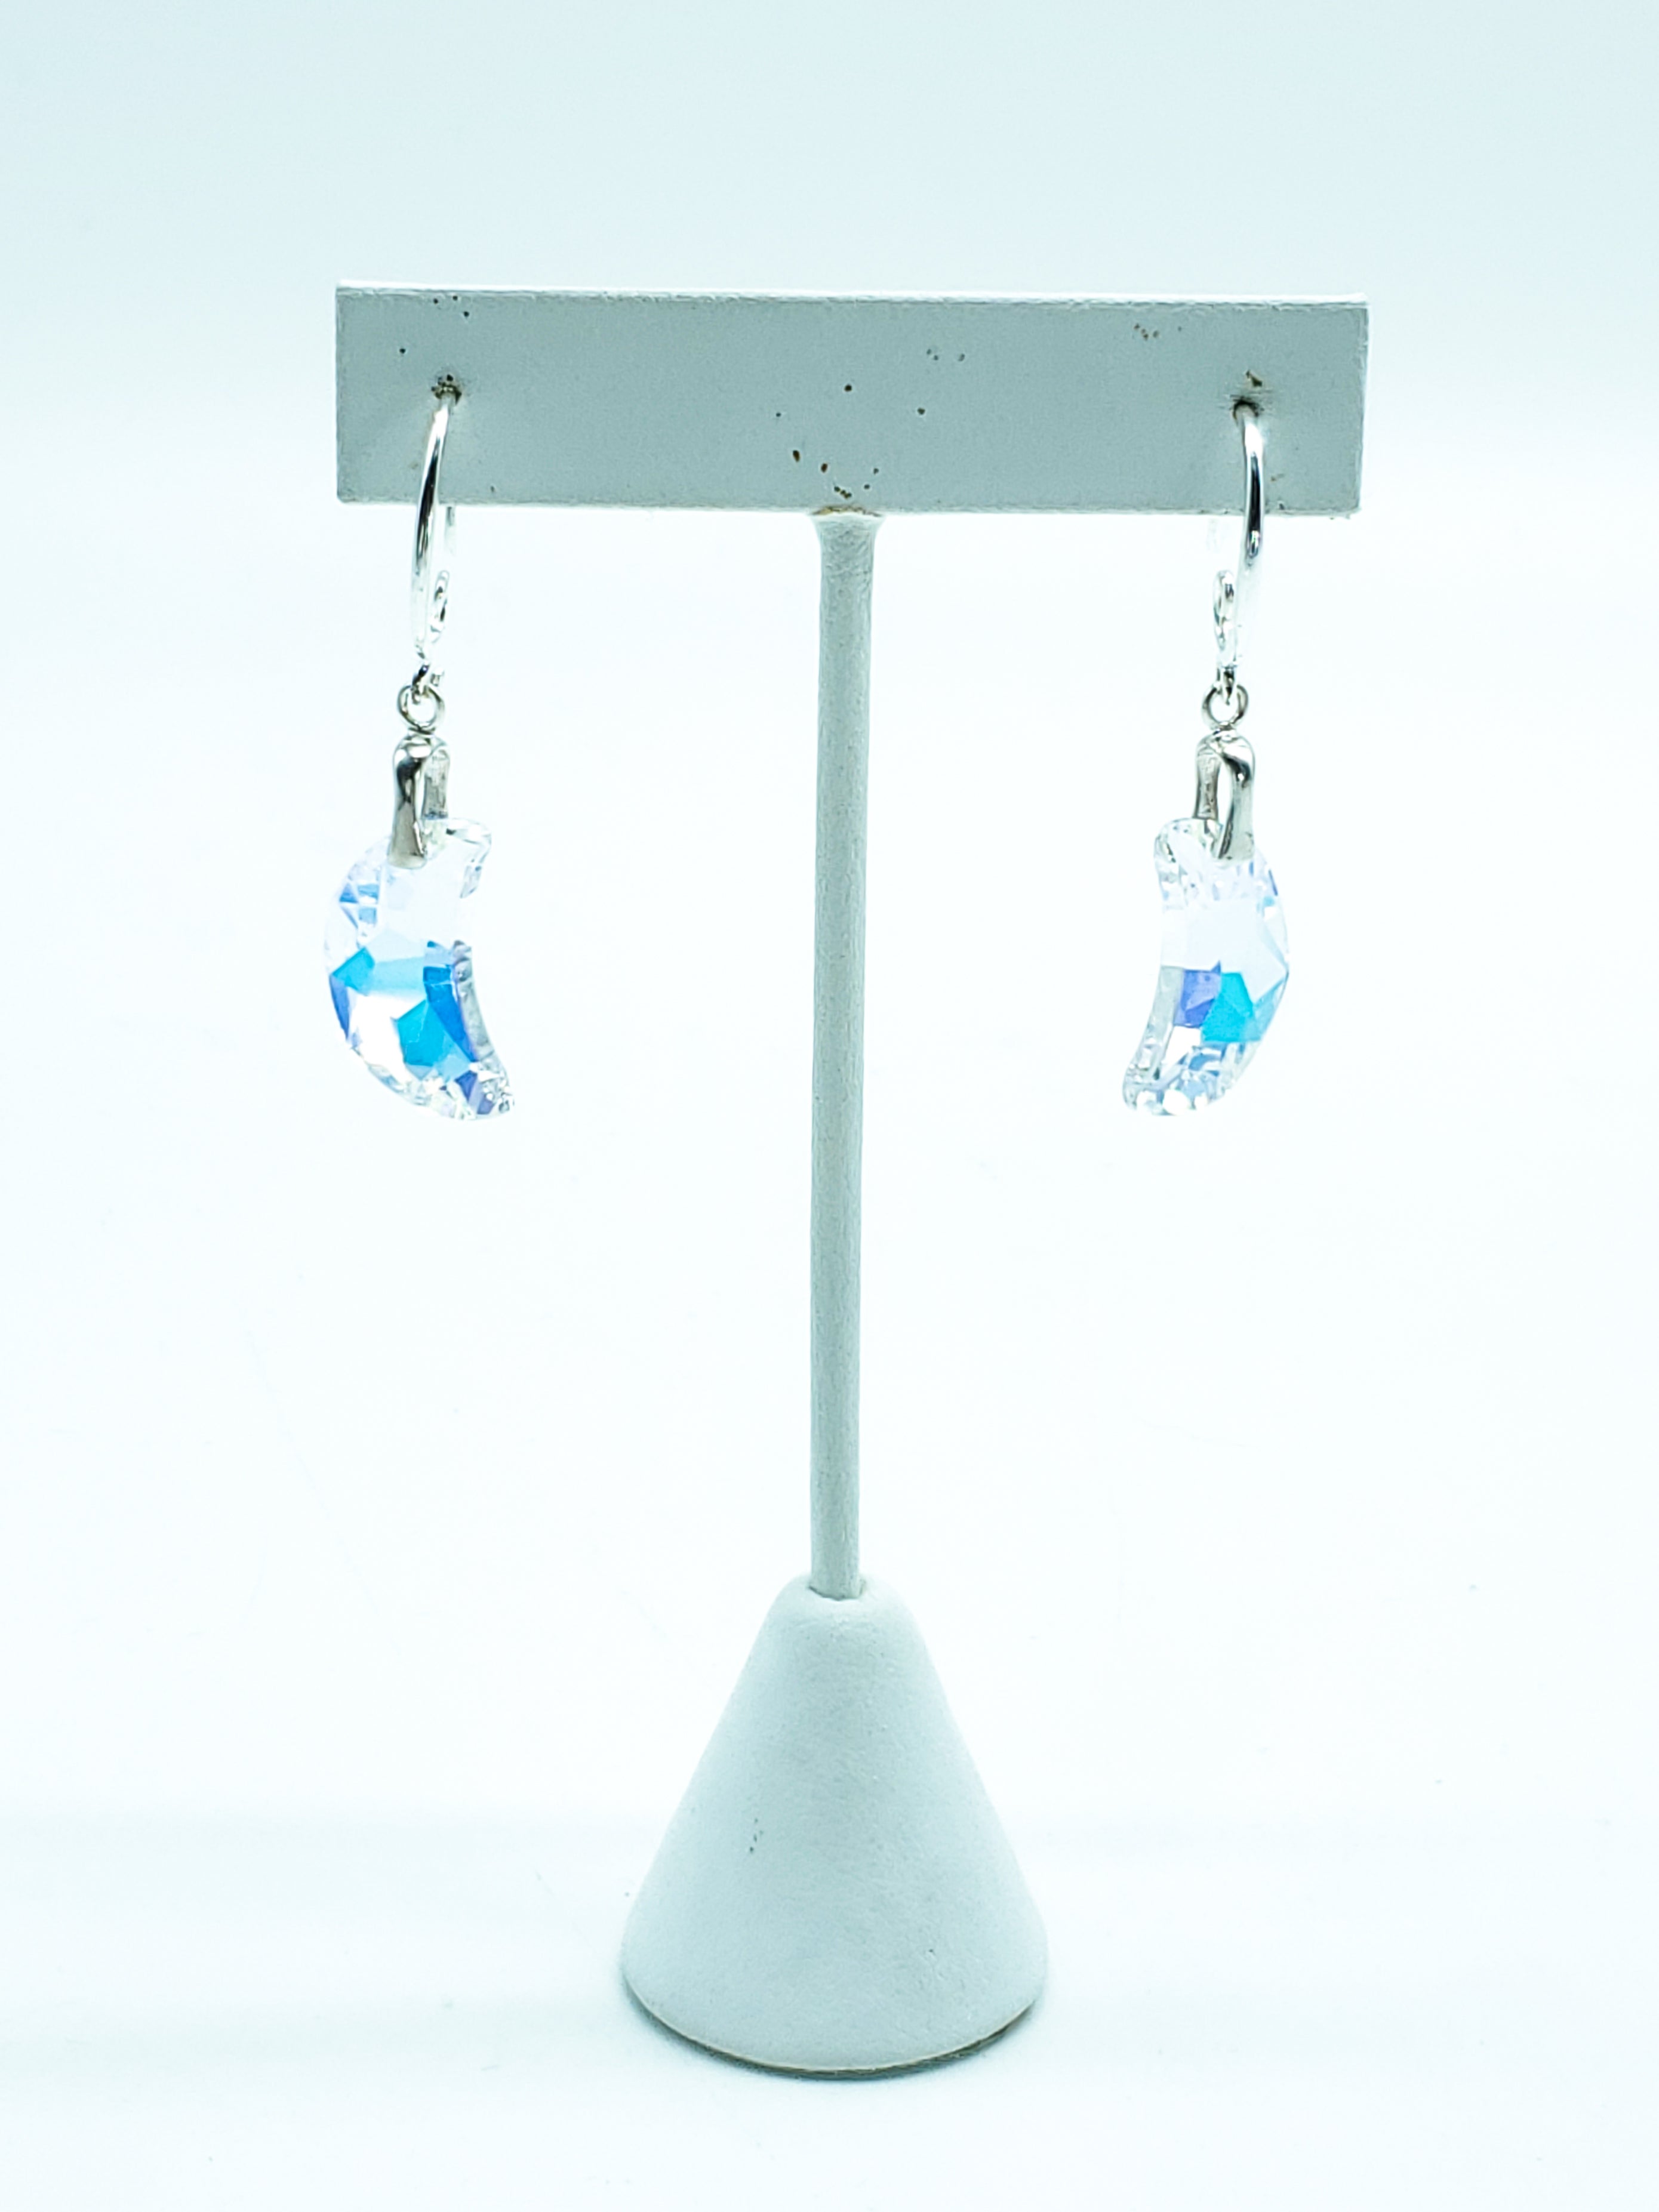 "Crystal Aurore Boreale" Swarovski Crystal Moon Earrings on Sterling Silver - The Caffeinated Raven